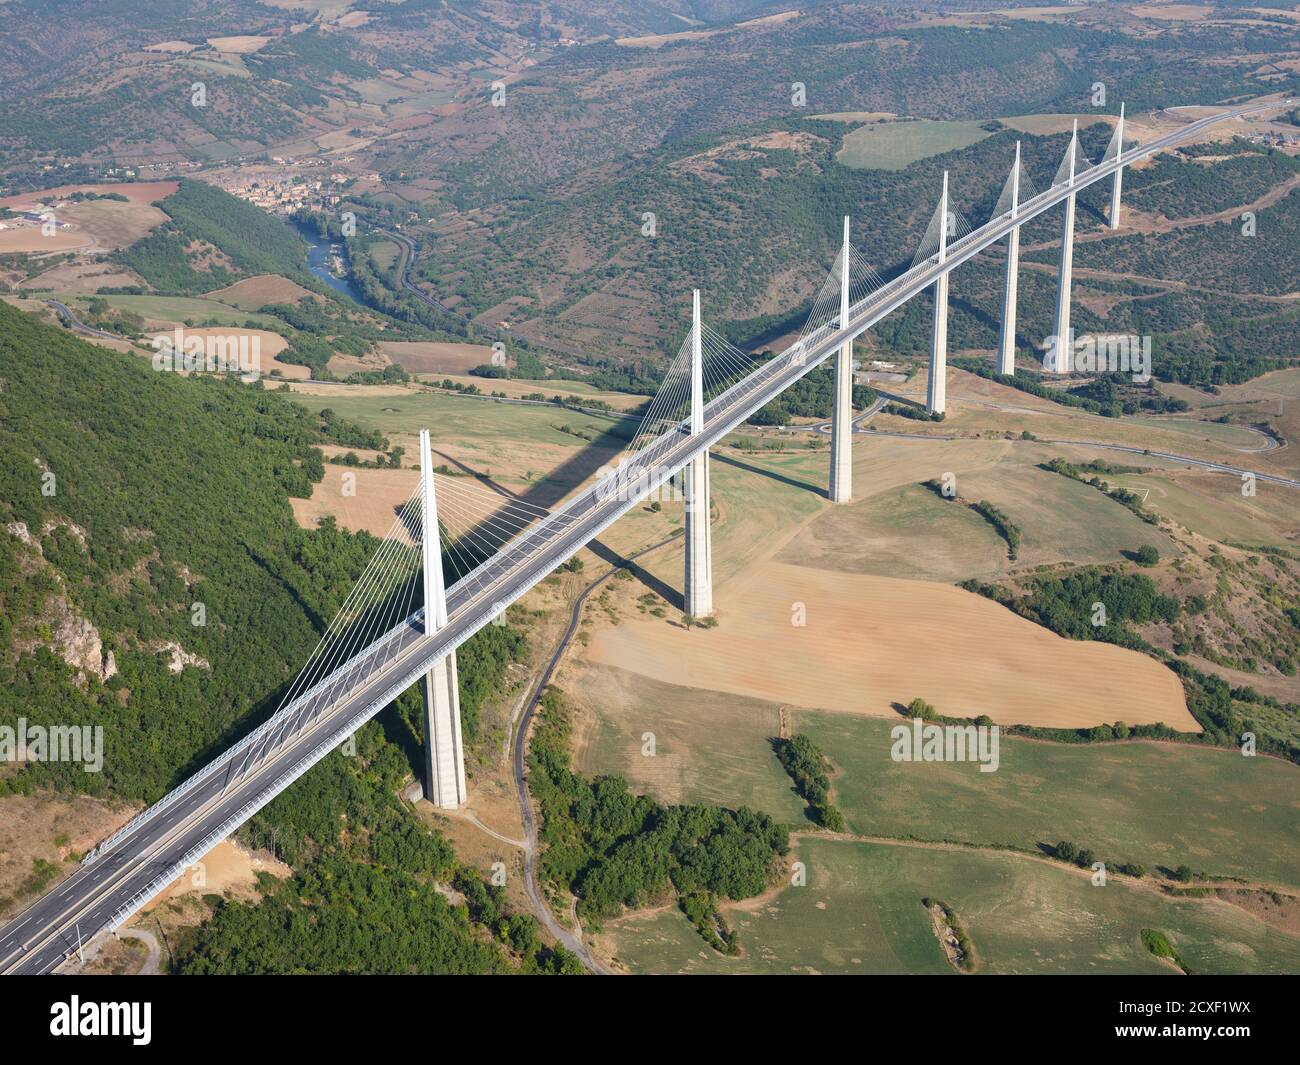 AERIAL VIEW. Millau Viaduct, at 336 meters above the Tarn River, it is the world's tallest bridge as of 2020. Millau, Aveyron, Occitanie, France. Stock Photo